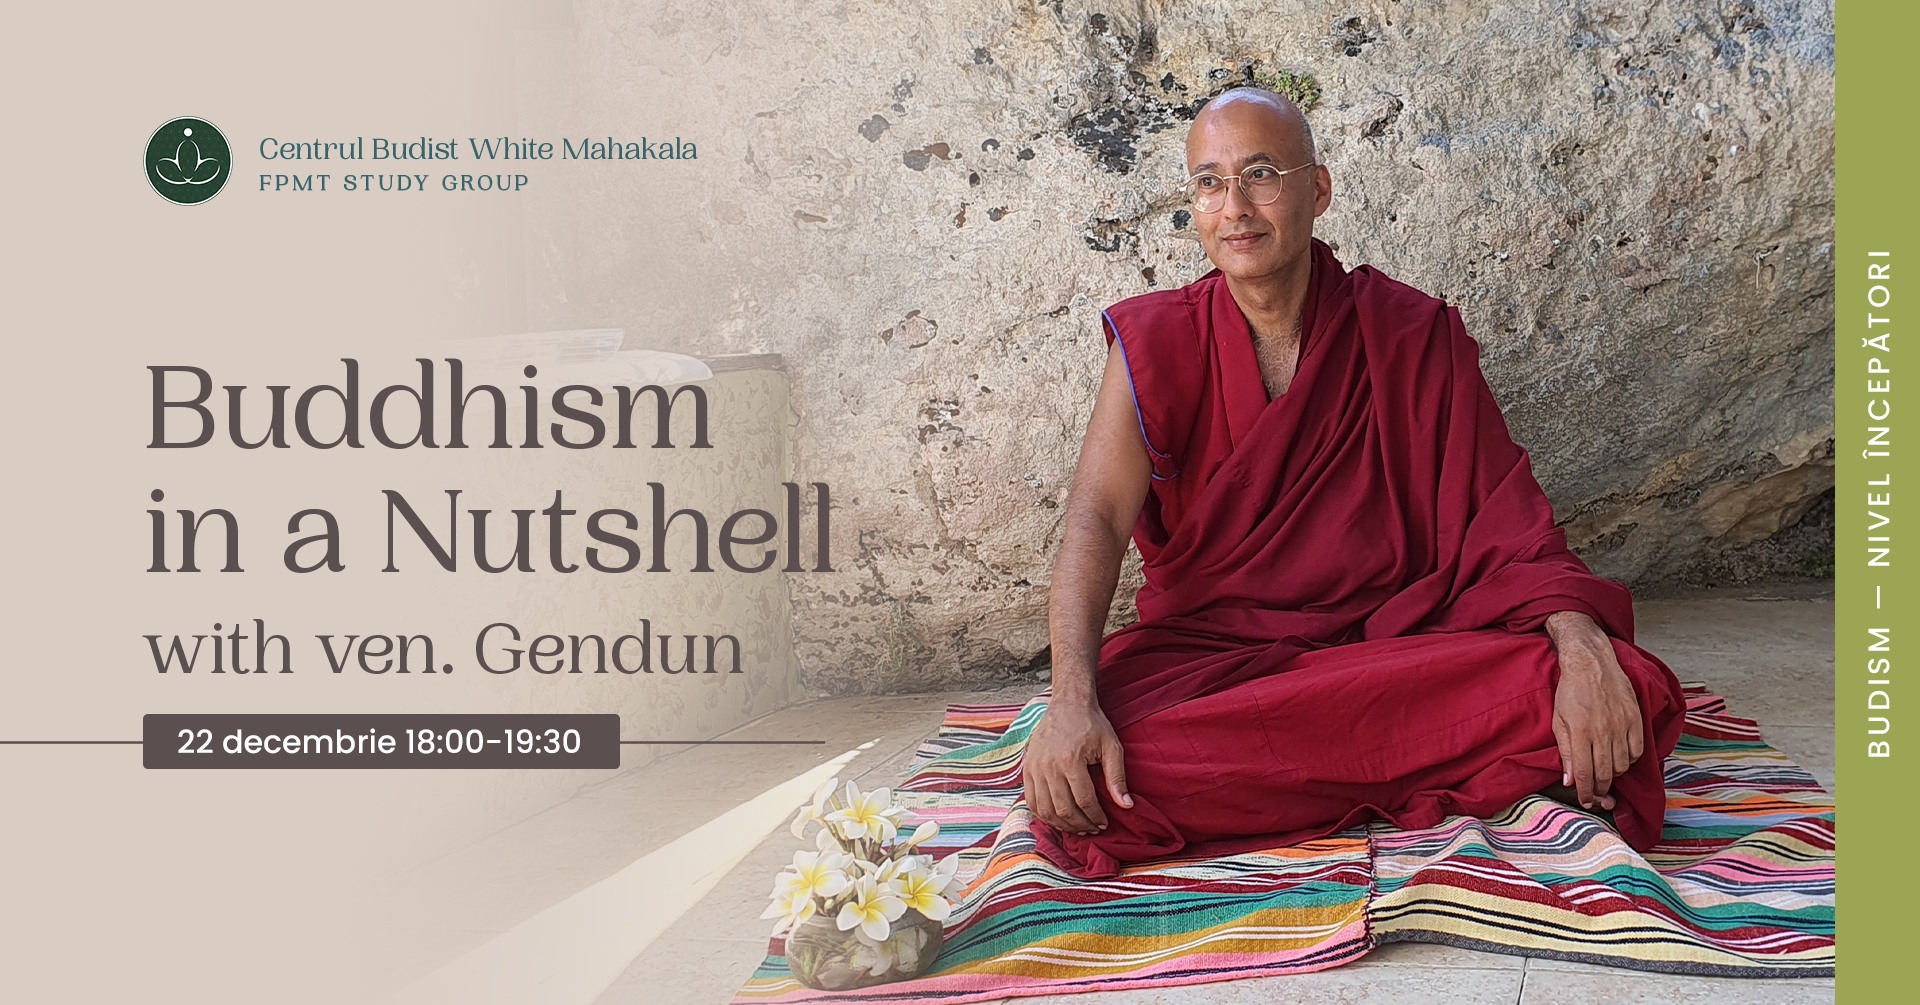 Buddhism in a Nutshell – The Buddha’s Path to Enlightenment (session 2)